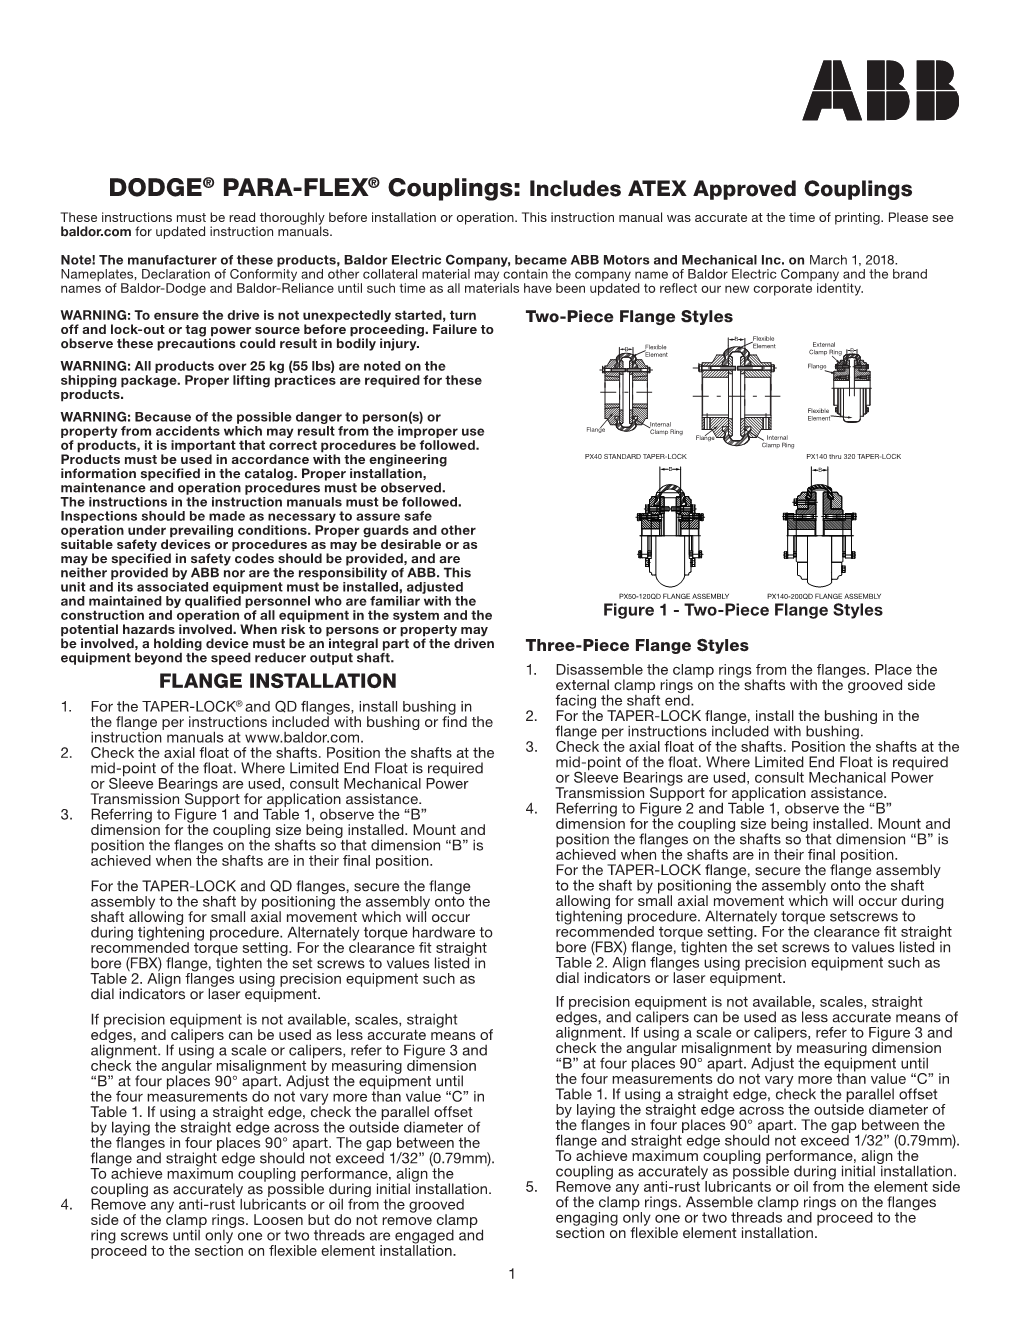 DODGE® PARA-FLEX® Couplings: Includes ATEX Approved Couplings These Instructions Must Be Read Thoroughly Before Installation Or Operation